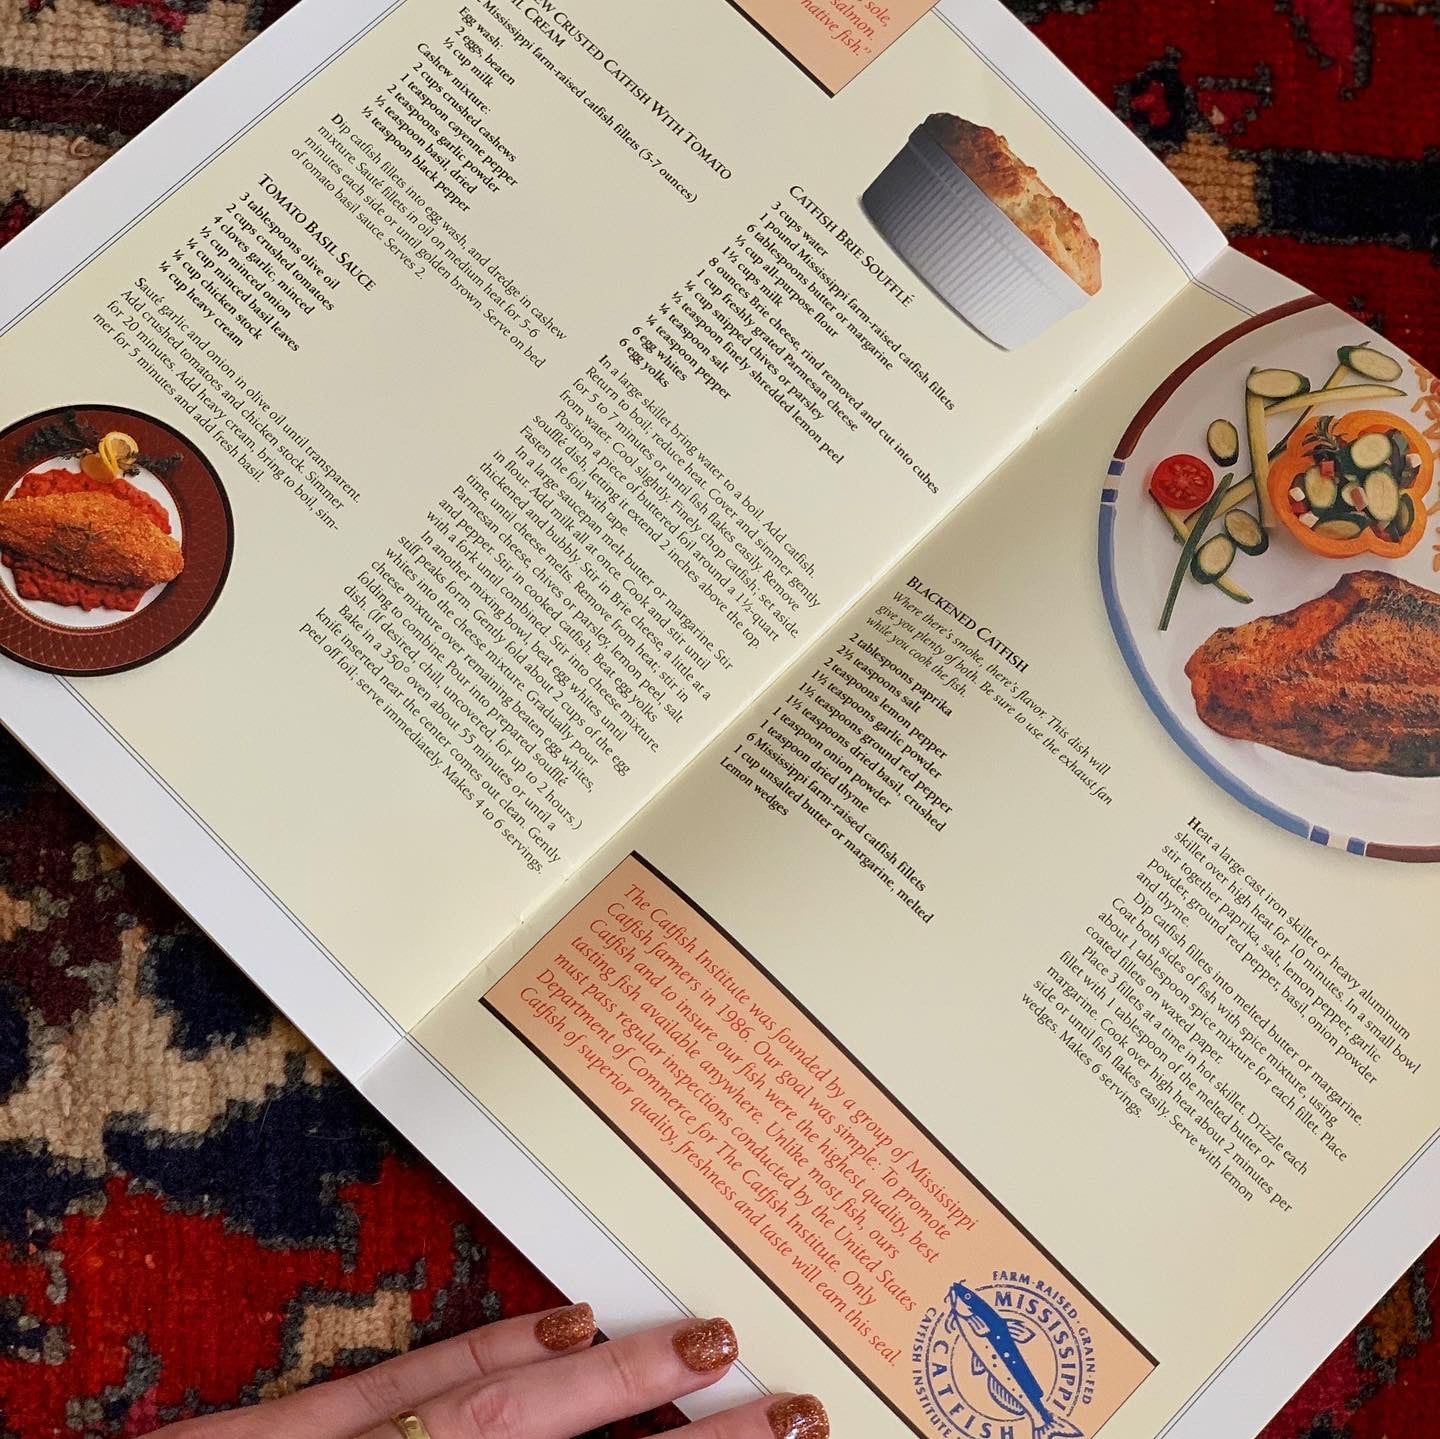 Catfish Recipe Book by the Catfish Institute of Mississippi (1993)